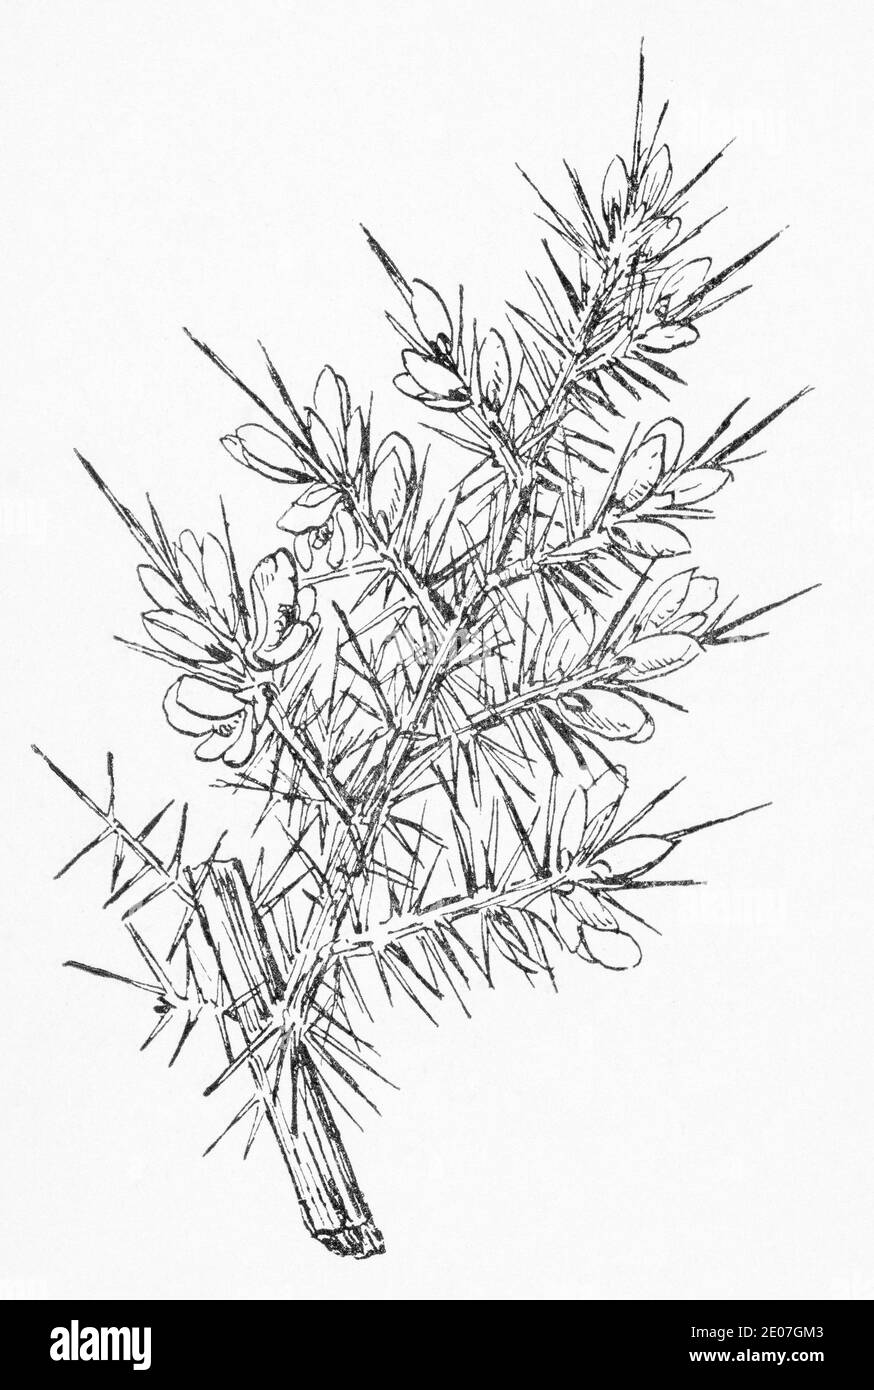 Old botanical illustration engraving of Gorse, Furze / Ulex europaeus. Traditional medicinal herbal plant. See Notes Stock Photo